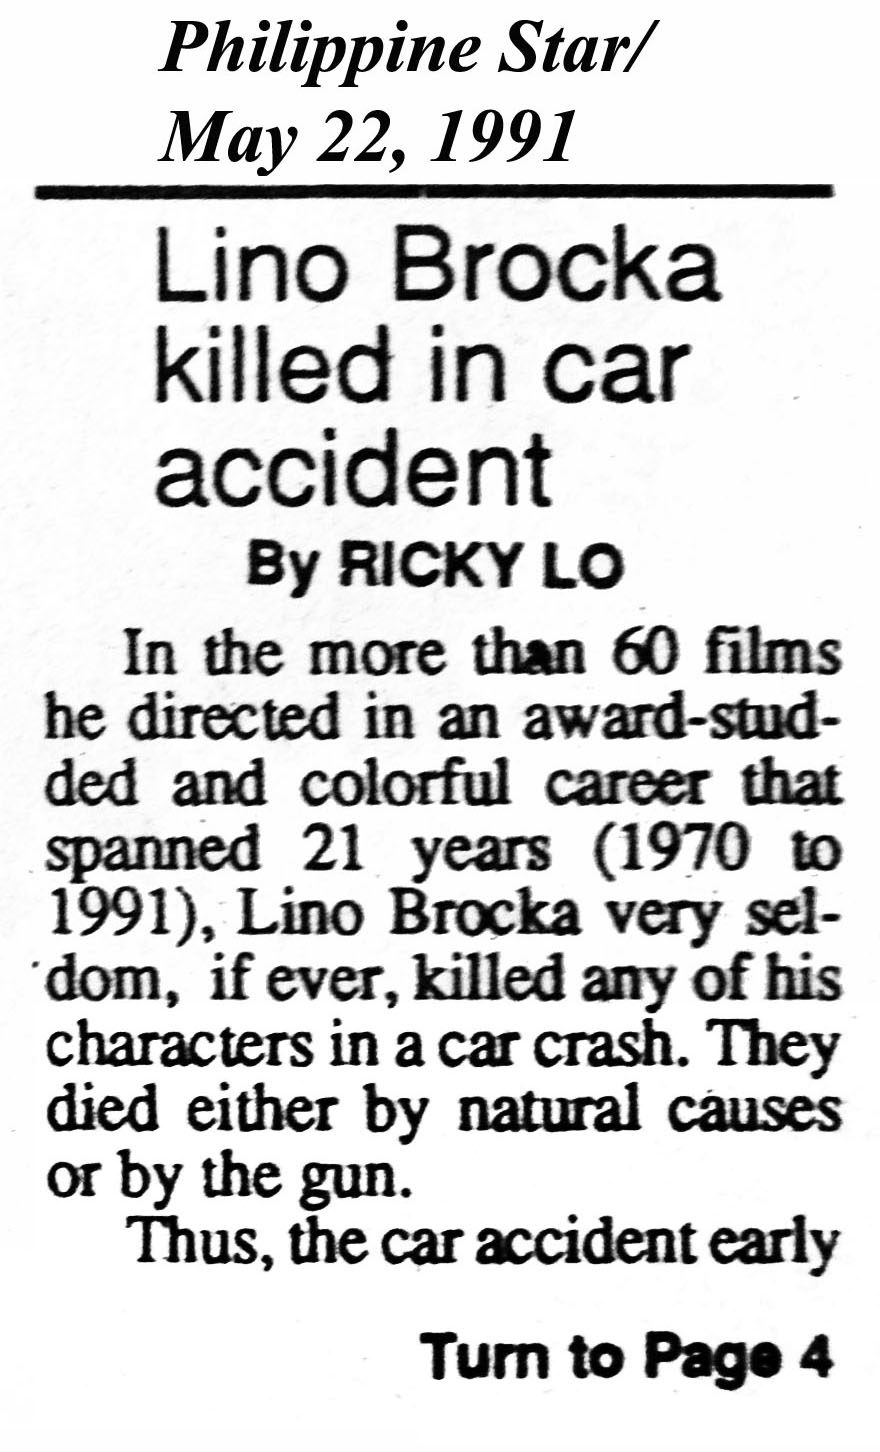 [Lino+Brocka+killed+in+Car+Accident-Phil+Sta-May22-91+issue-cropped.jpg]